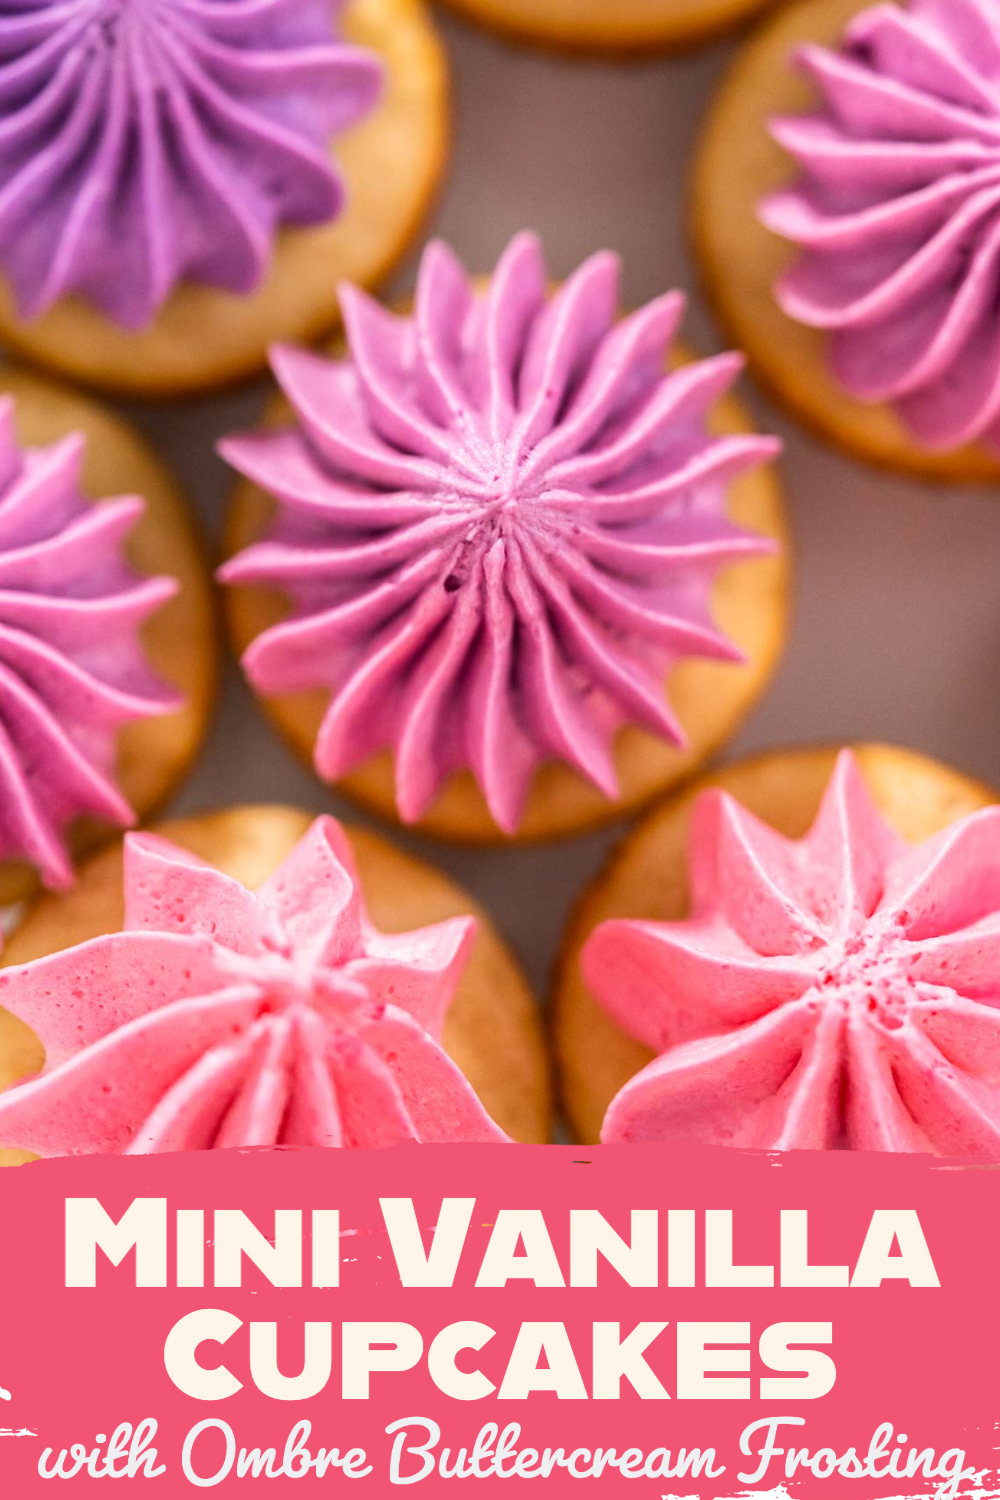 Mini Vanilla Cupcakes with Ombre Buttercream Frosting